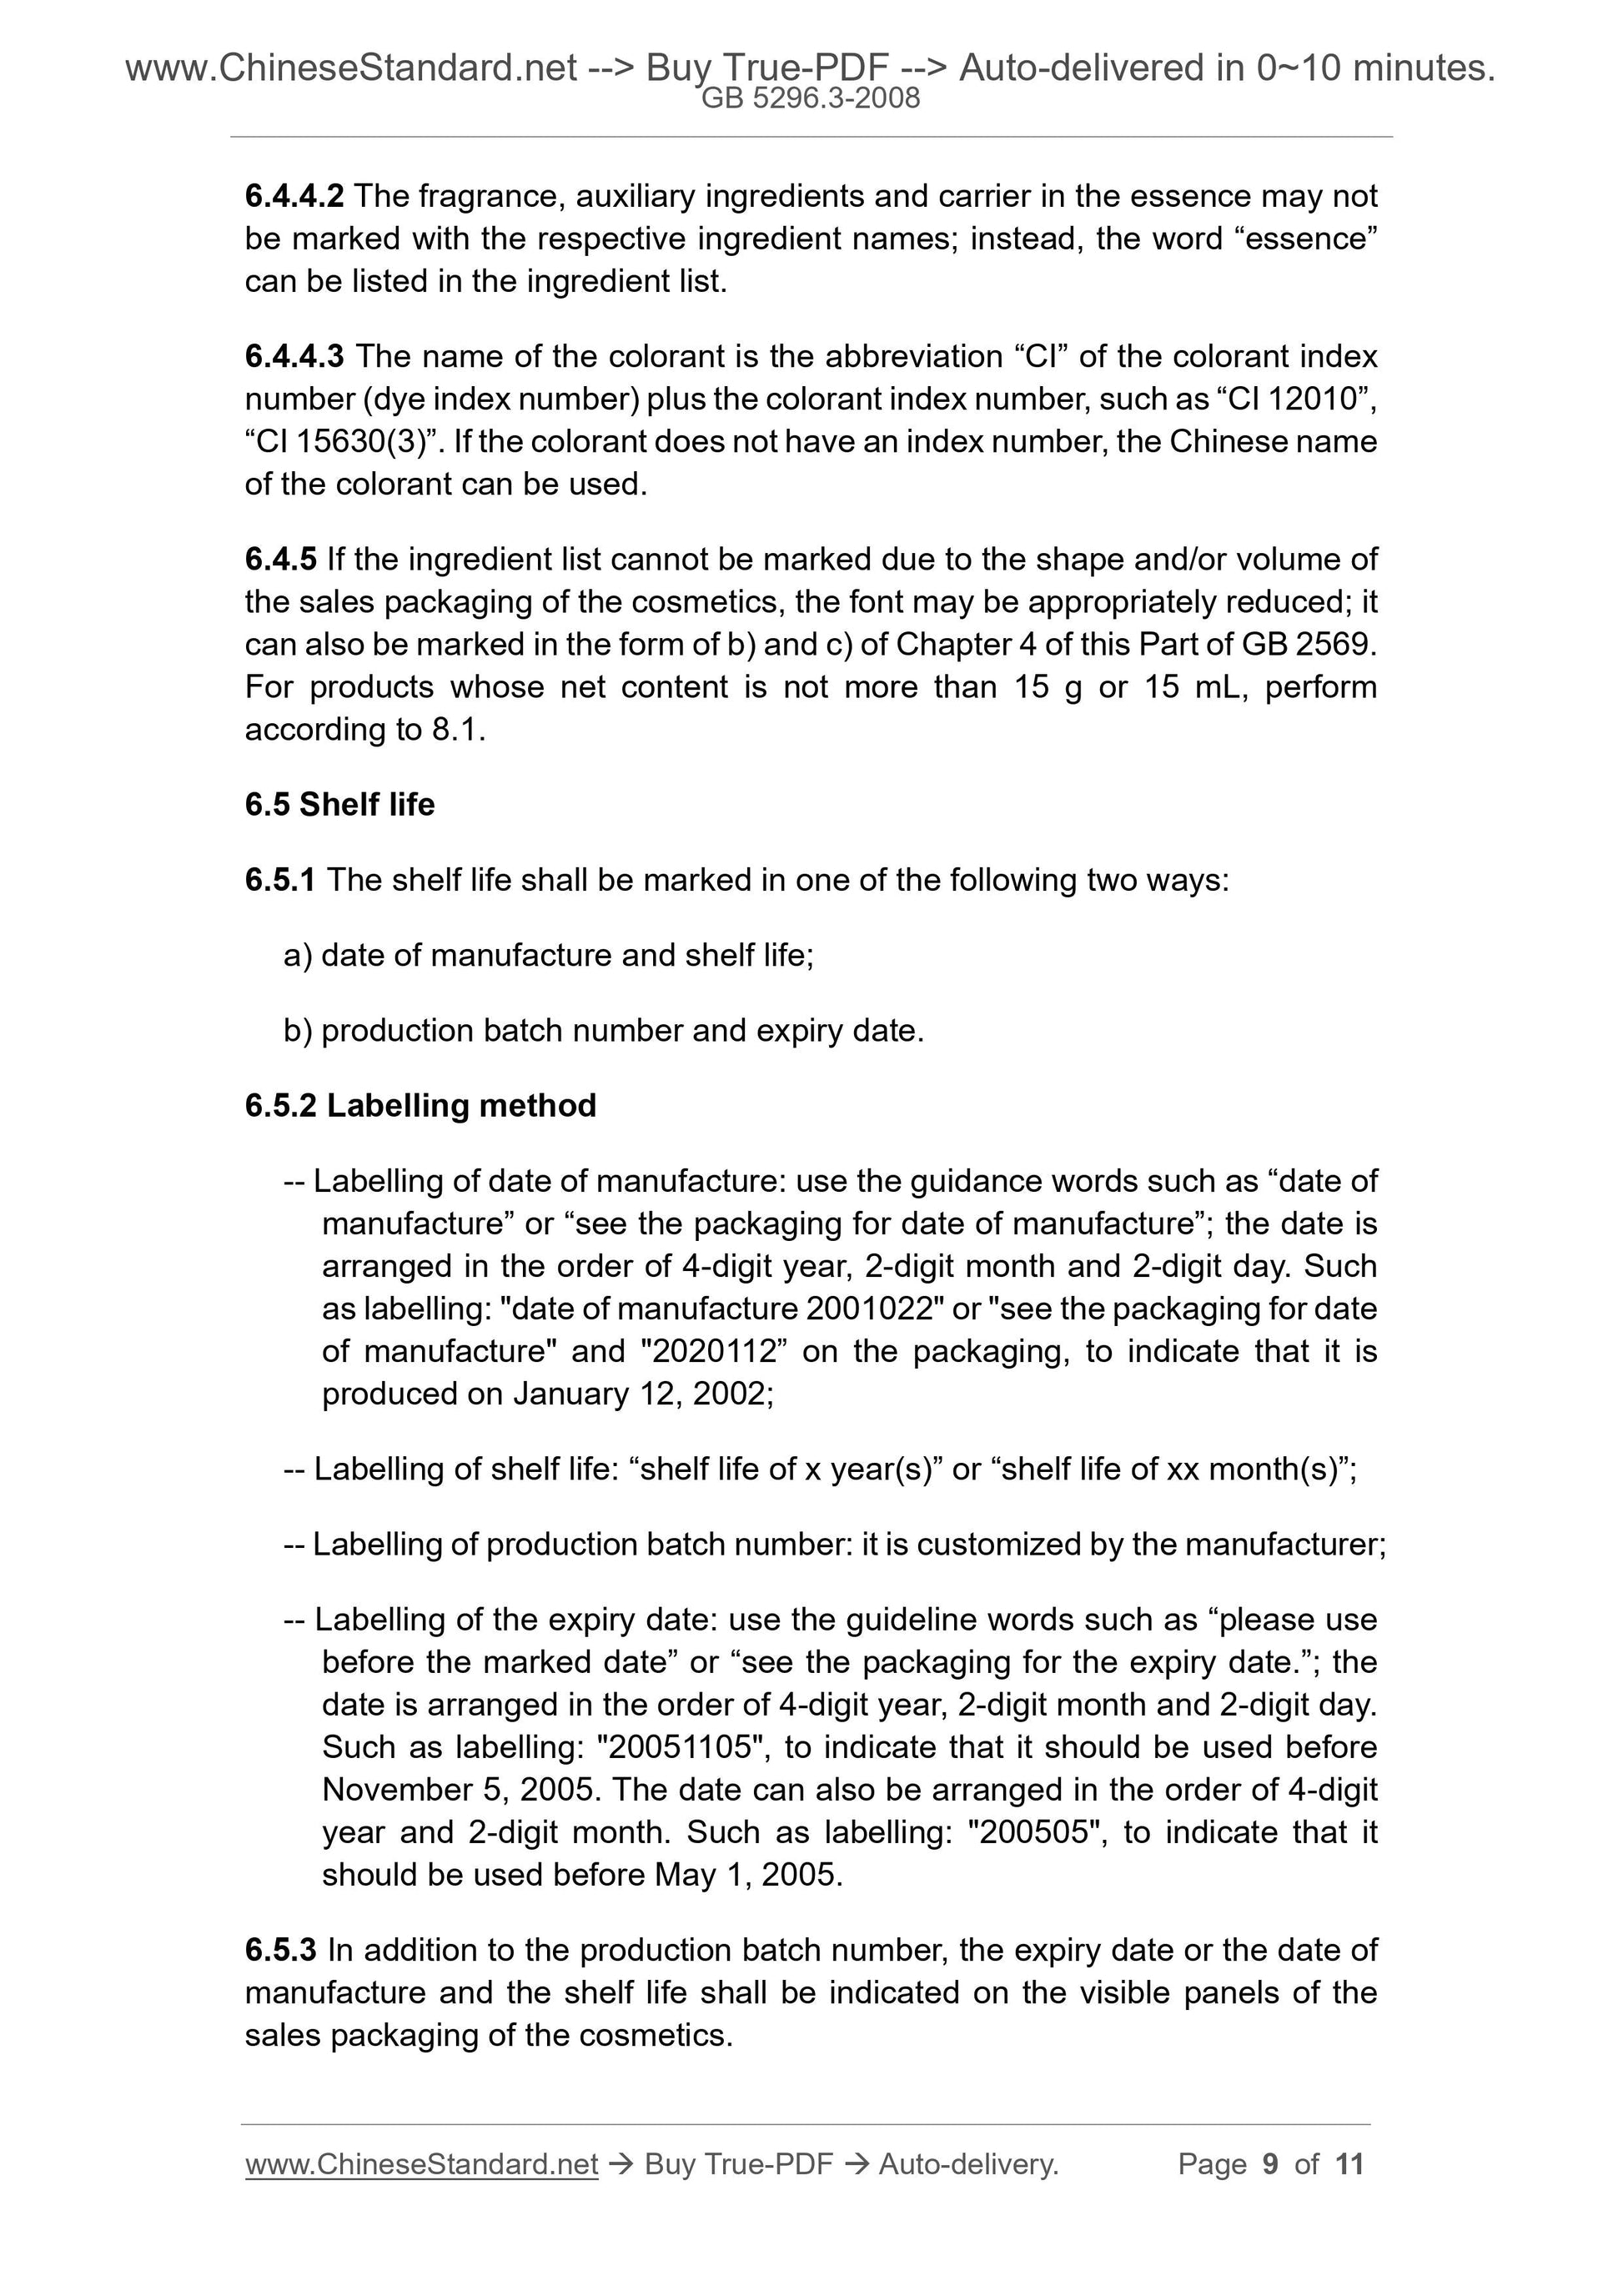 GB 5296.3-2008 Page 6